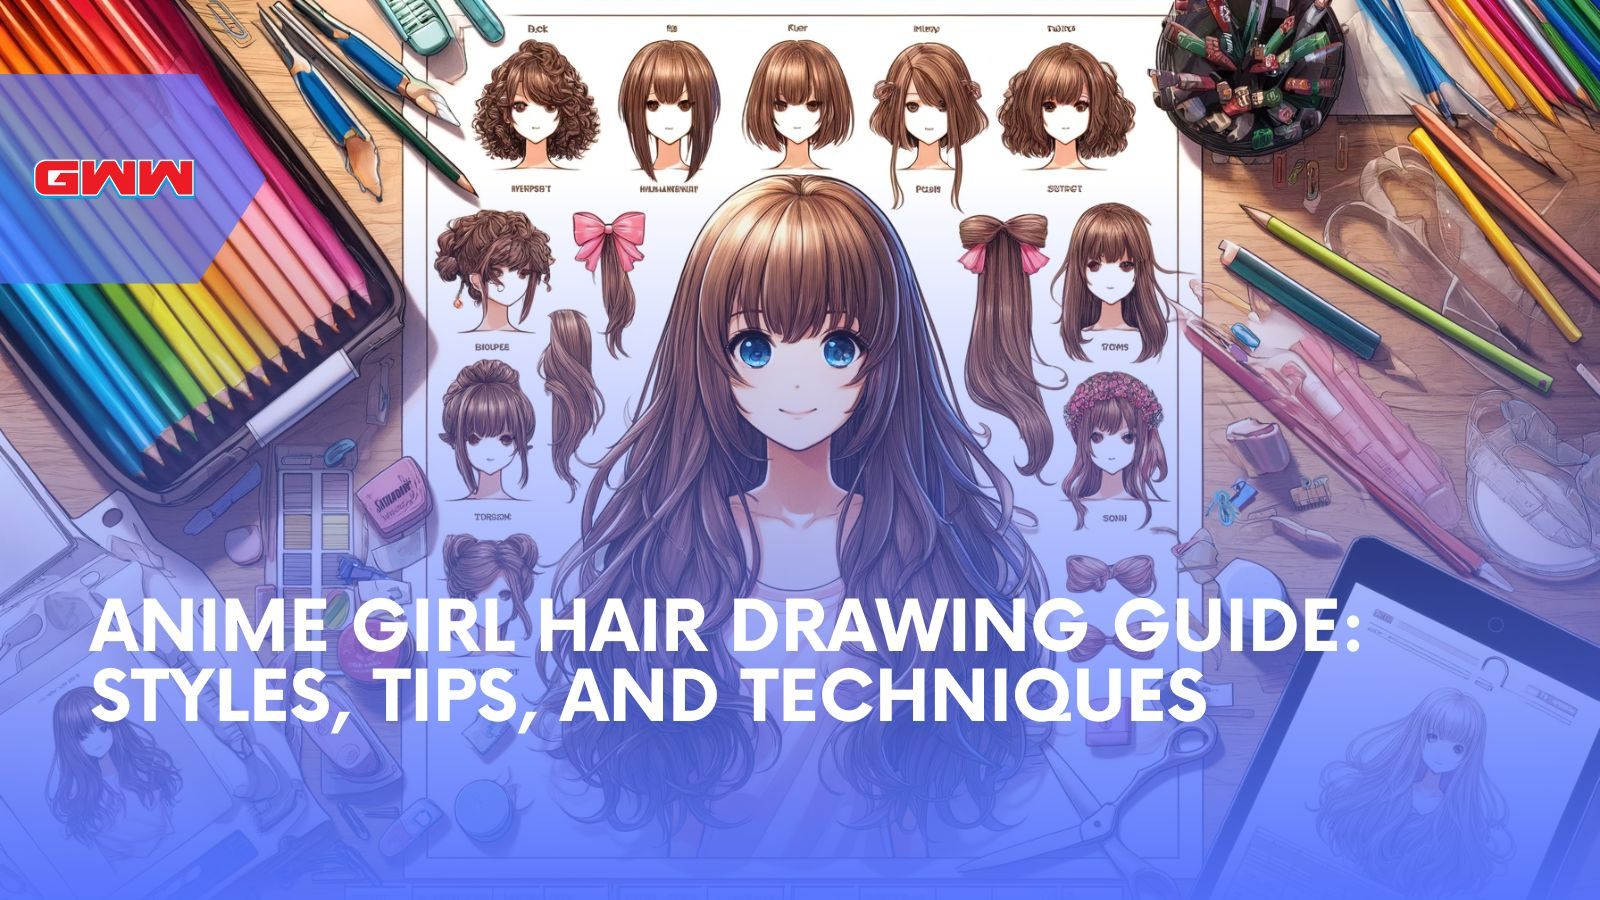 Anime Girl Hair Drawing Guide: Styles, Tips, and Techniques